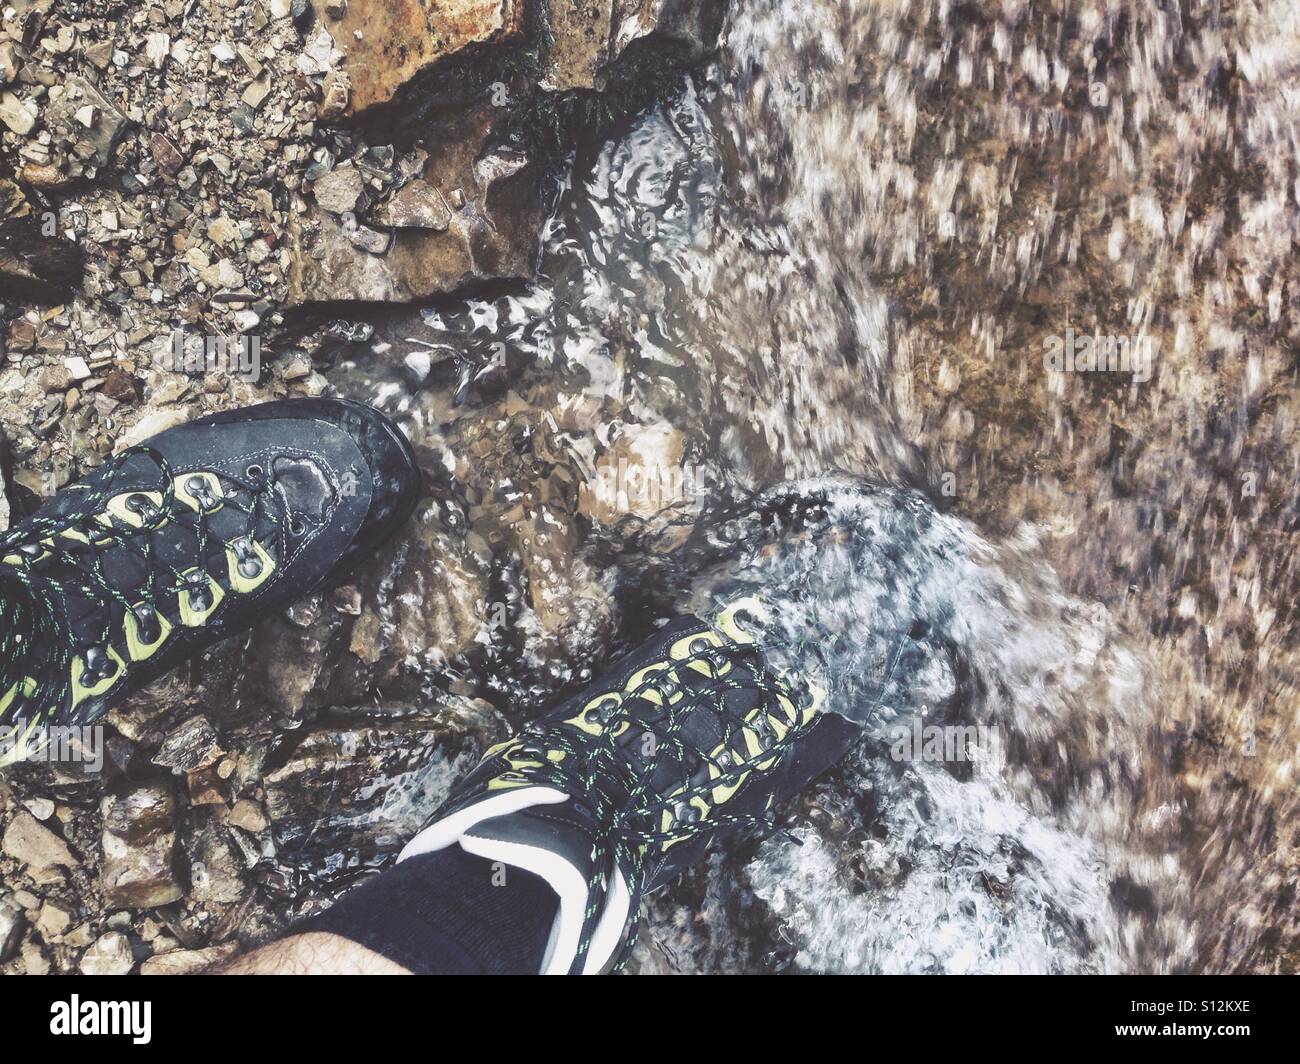 Hiking boots walking into the fresh water of a mountain stream or creek Stock Photo